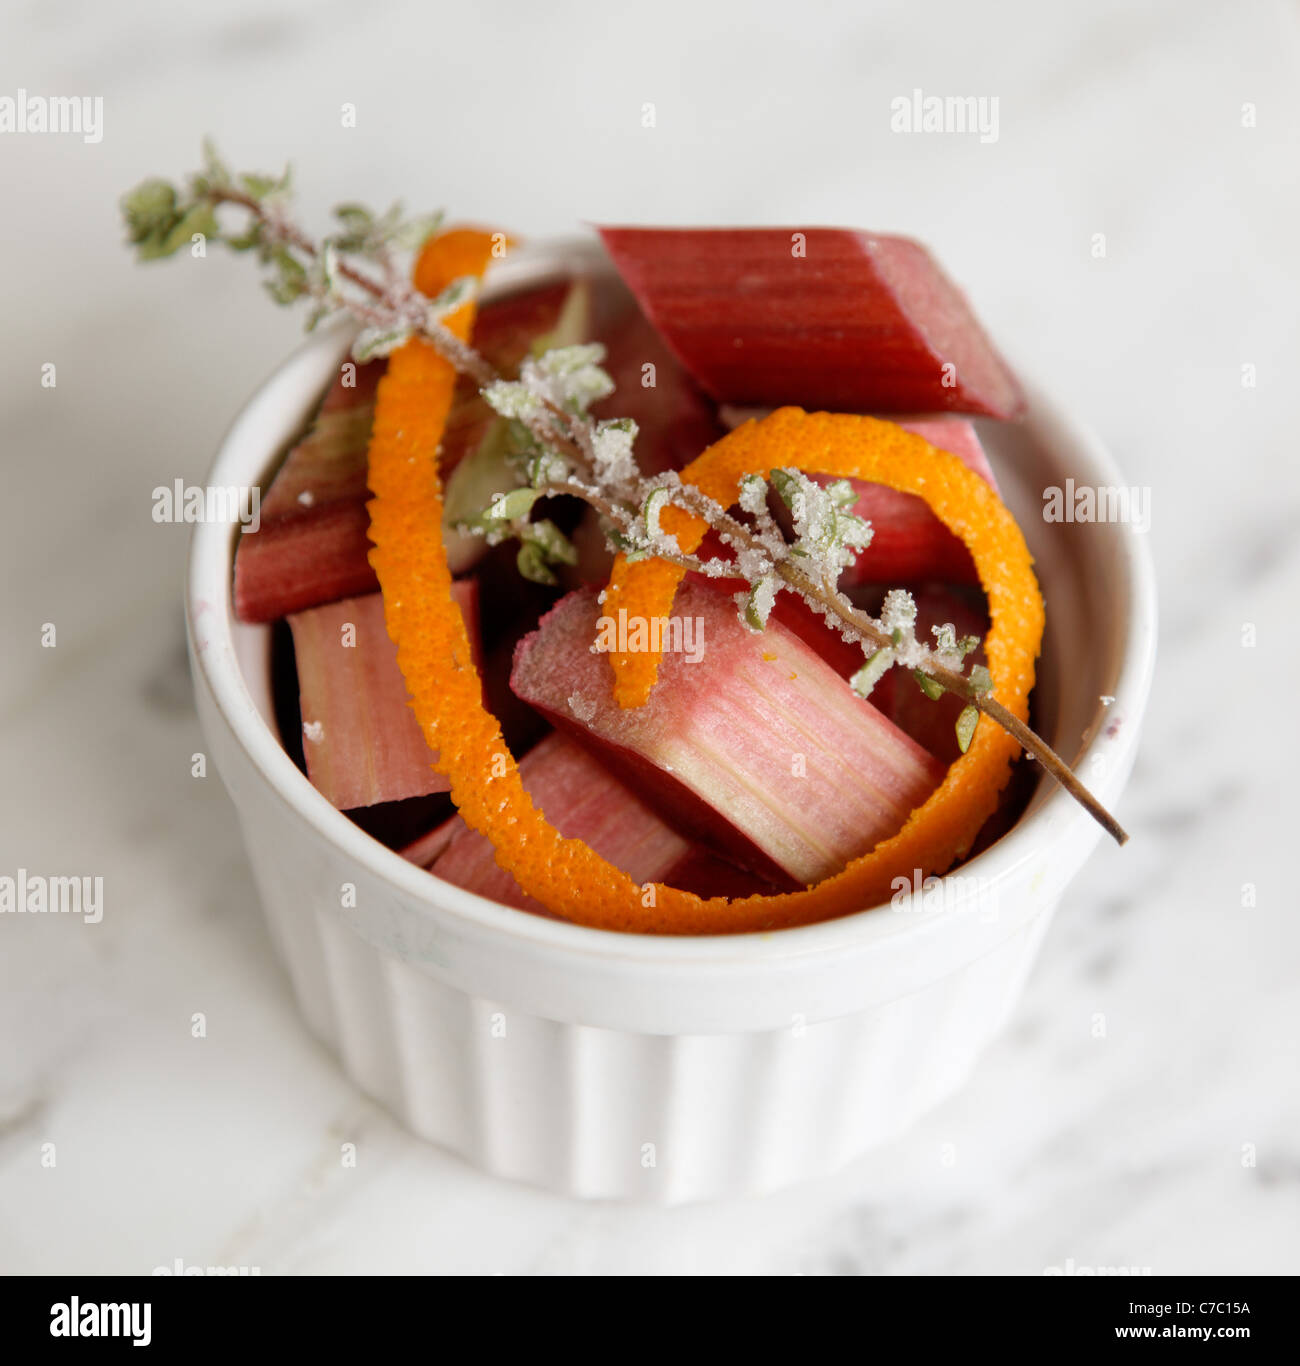 Chopped rhubarb in bowl garnished with orange peel and lavender sprig, by pastry chef Laurie Pfalzer, Pastry Craft Stock Photo